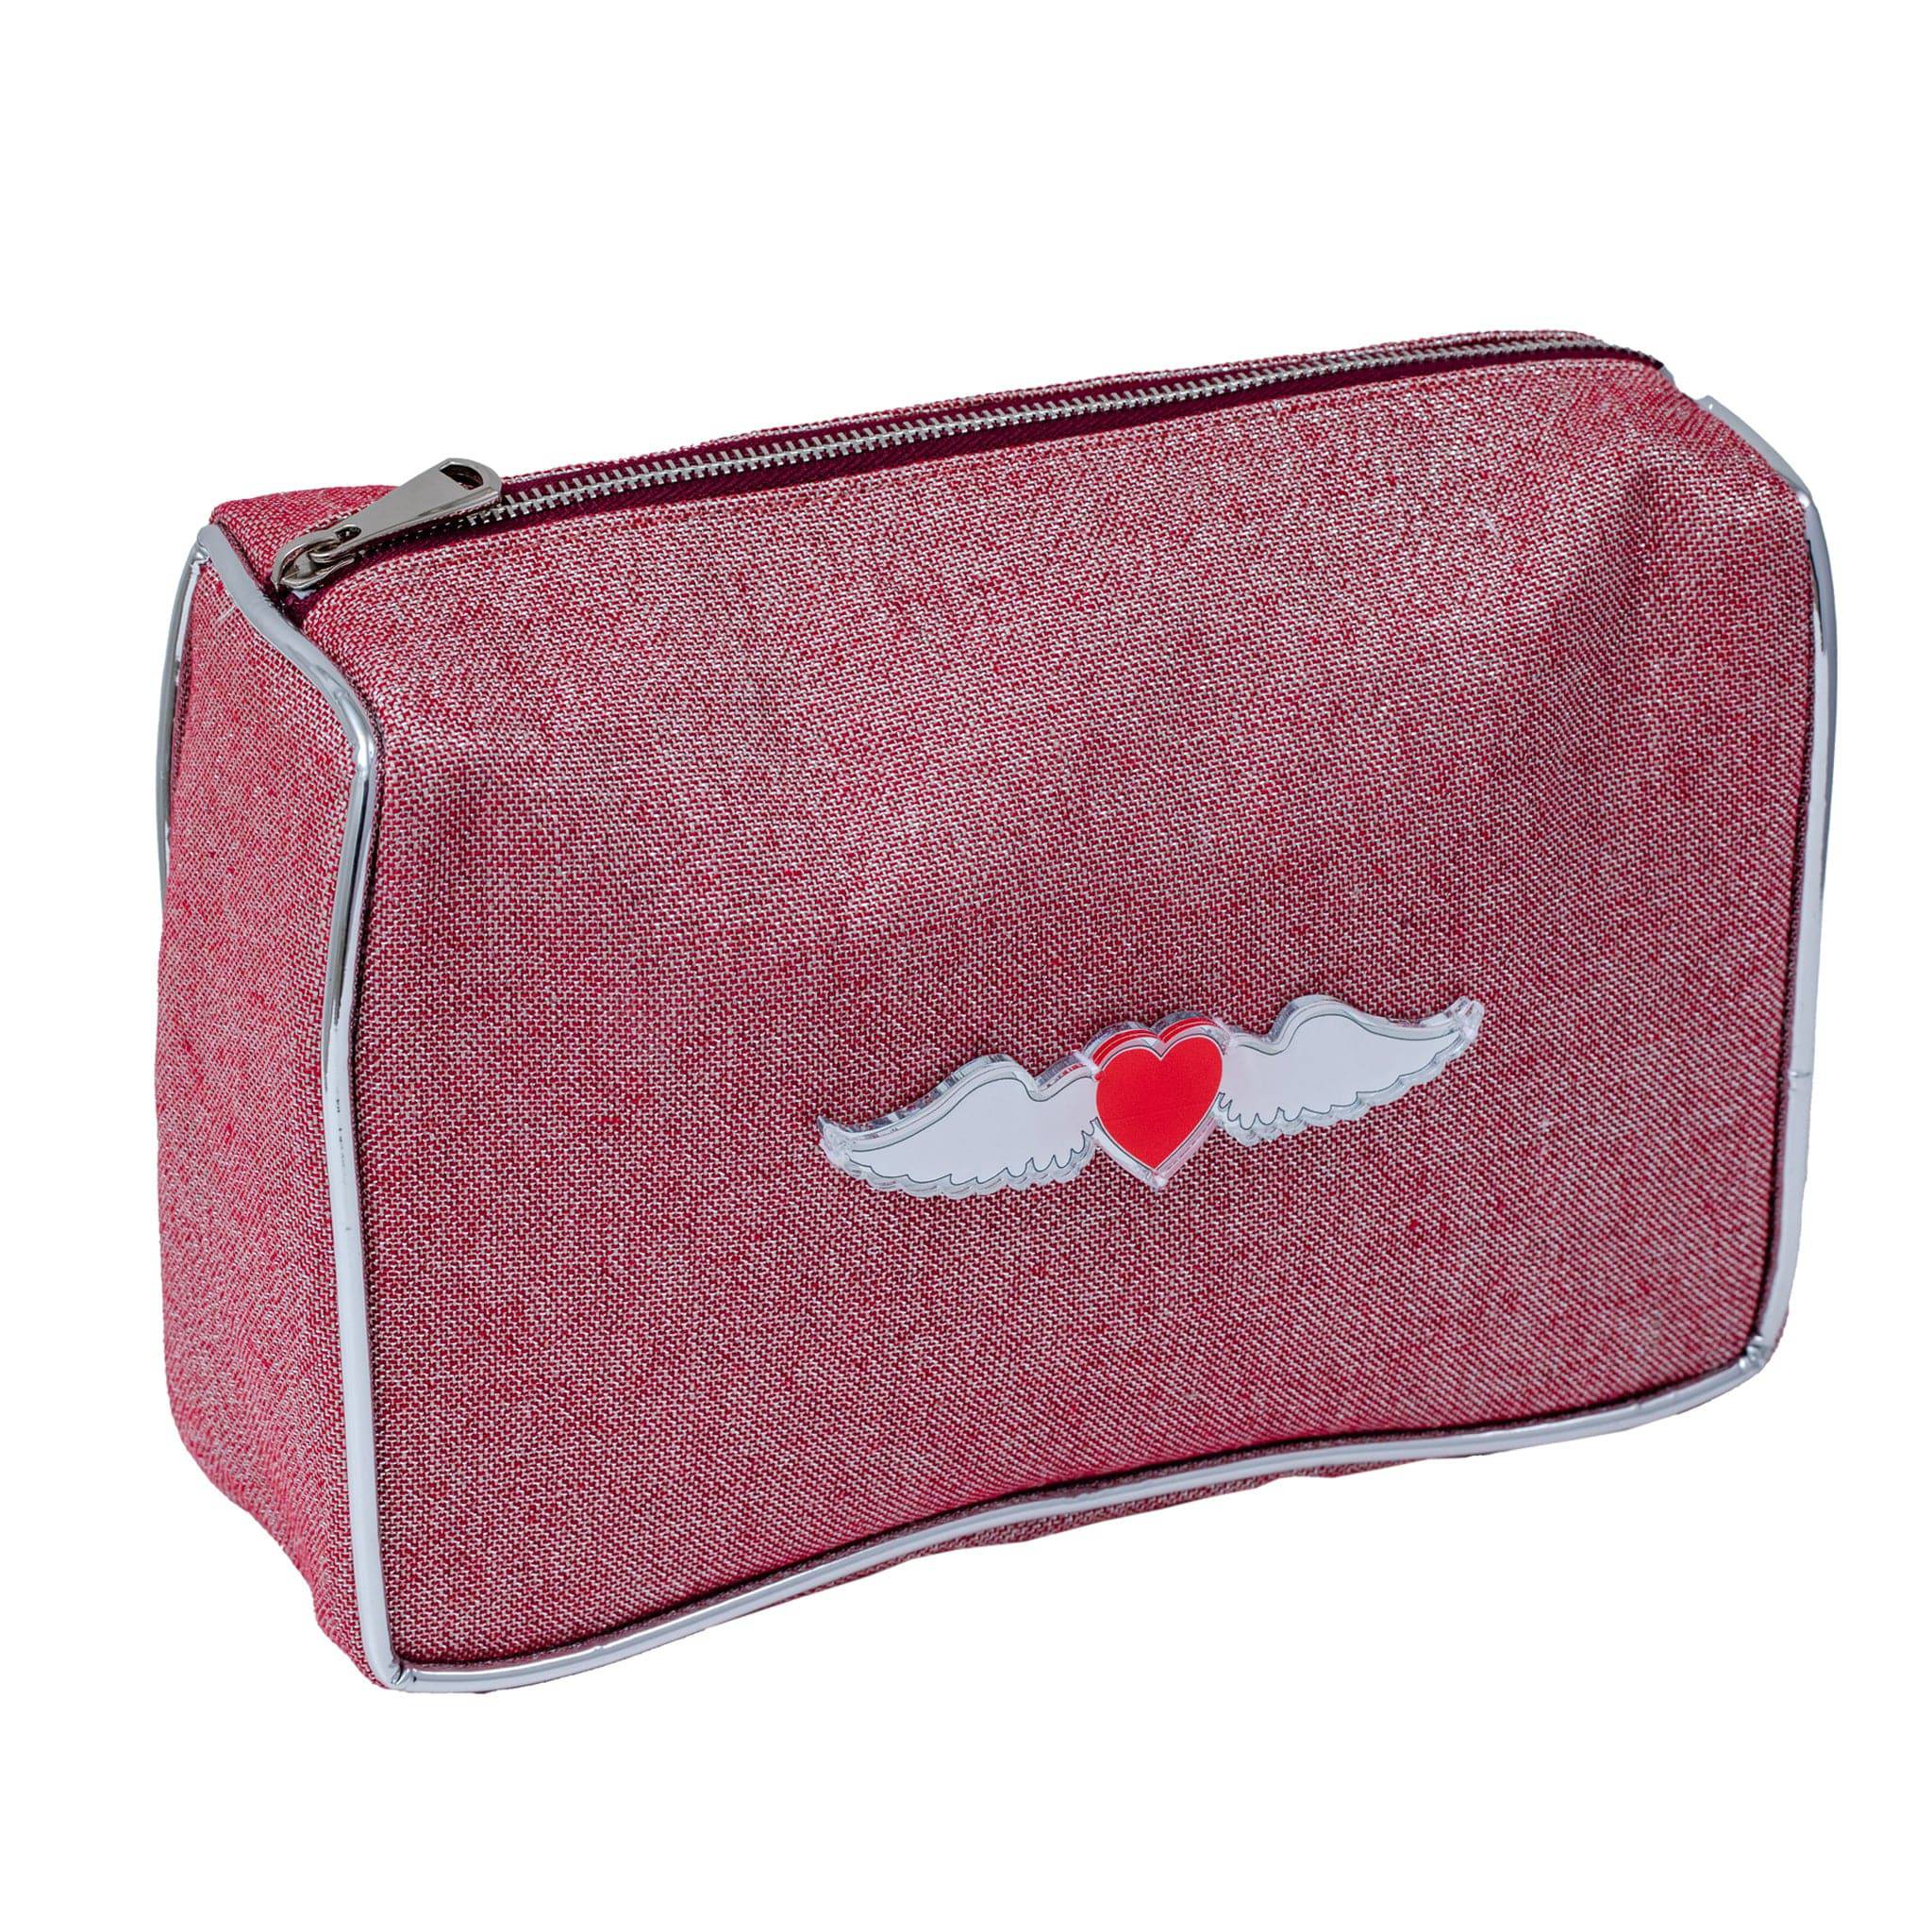 BLAZE Pouch | Red Sparkle heart with wings